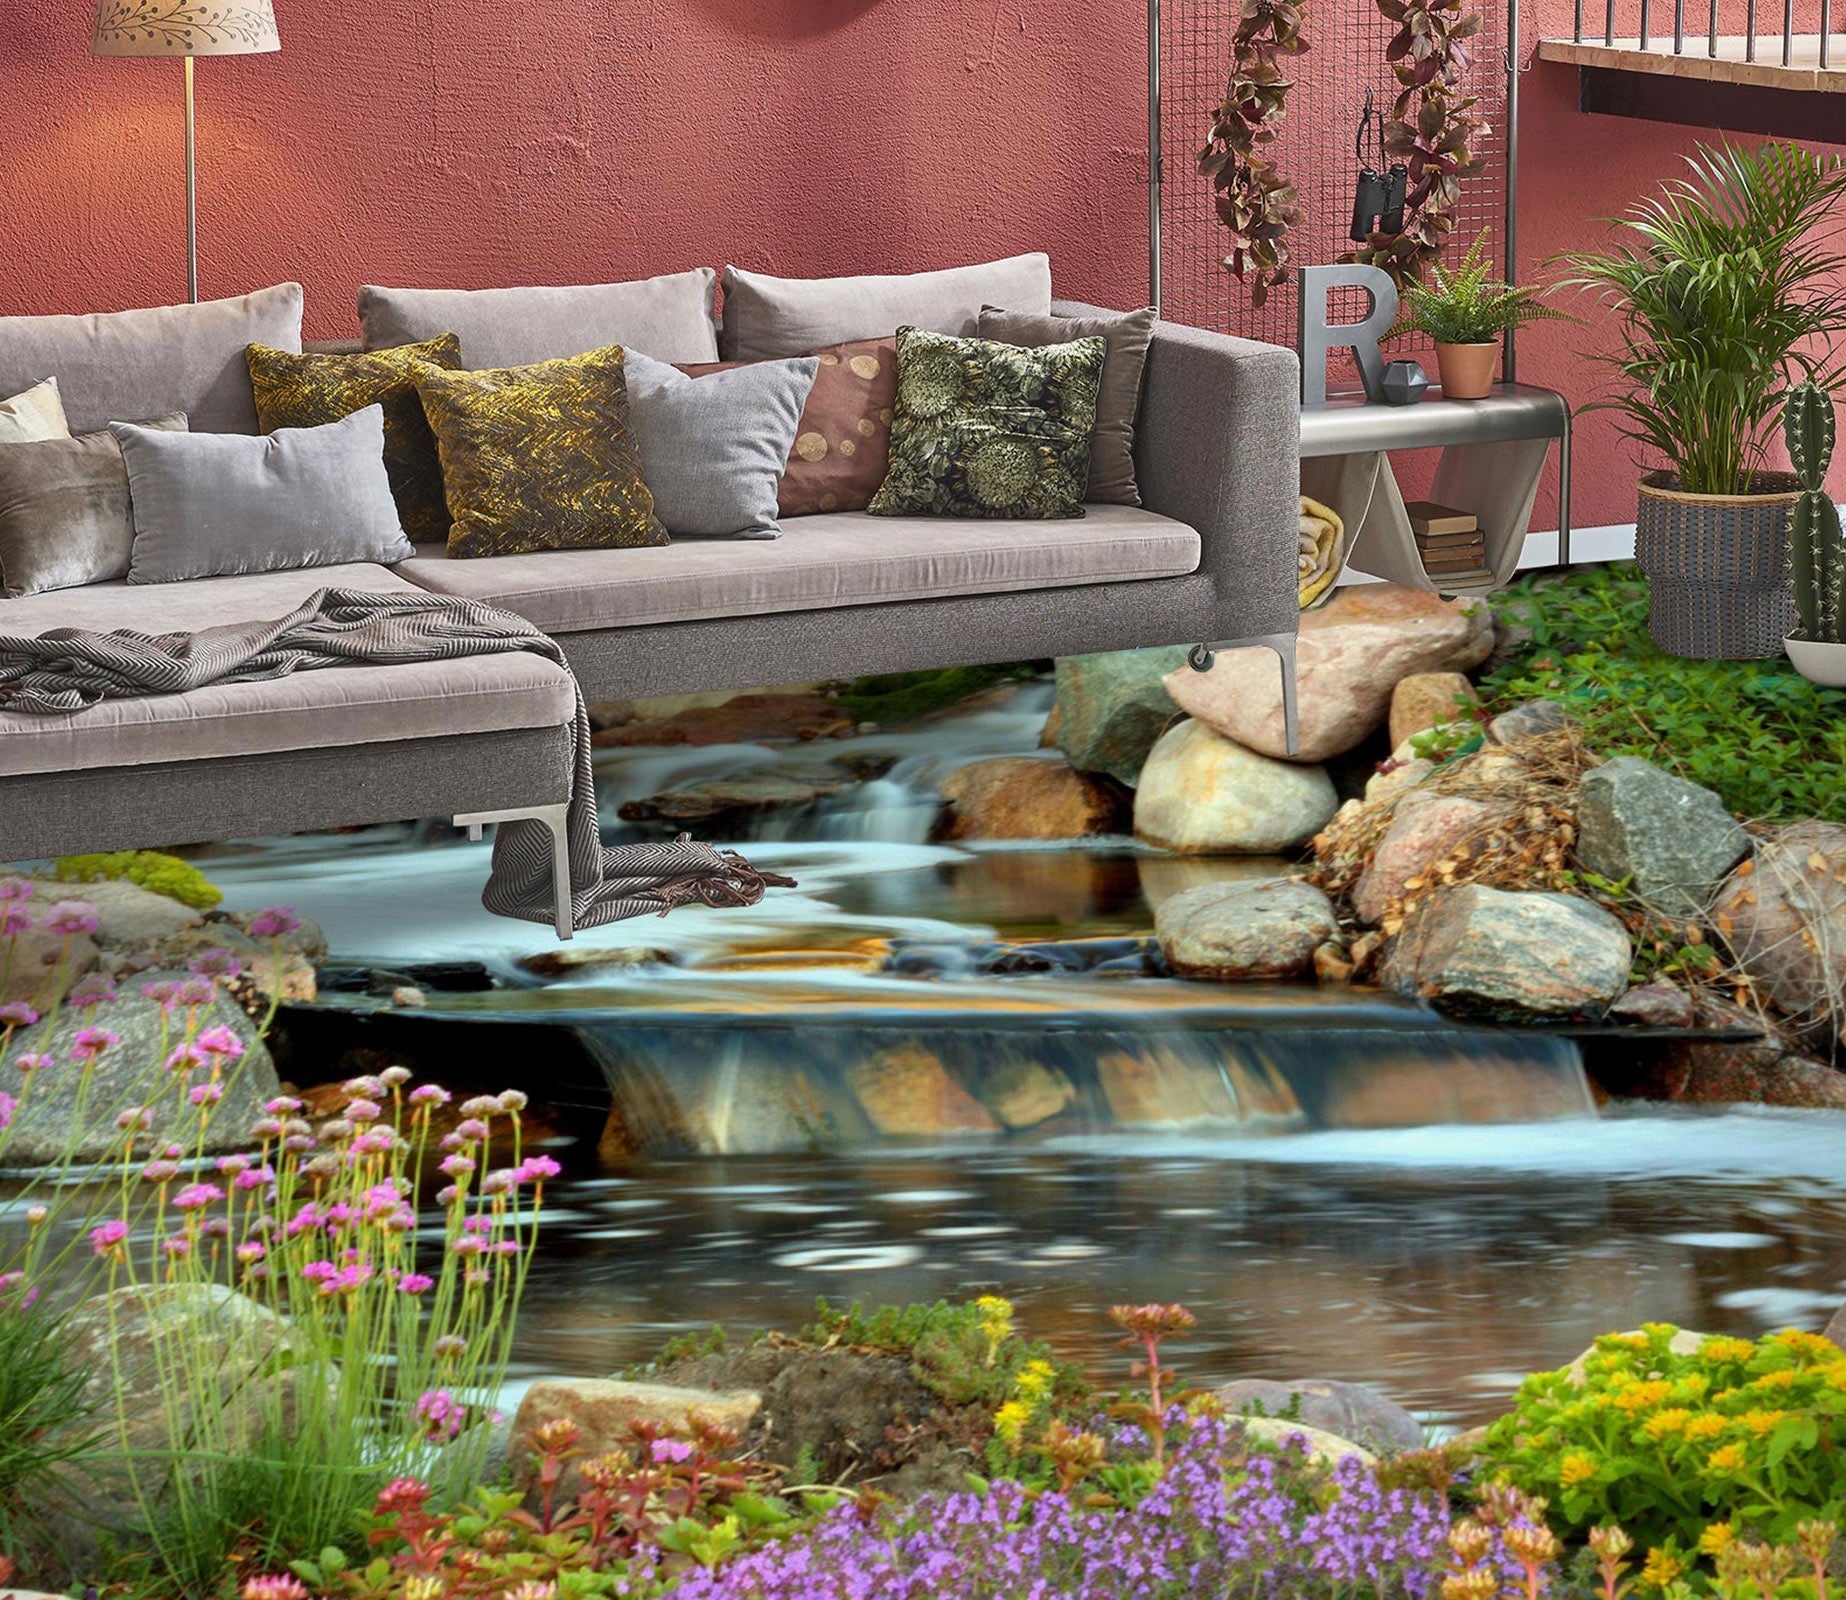 3D Warm Pond In Spring 1049 Floor Mural  Wallpaper Murals Self-Adhesive Removable Print Epoxy